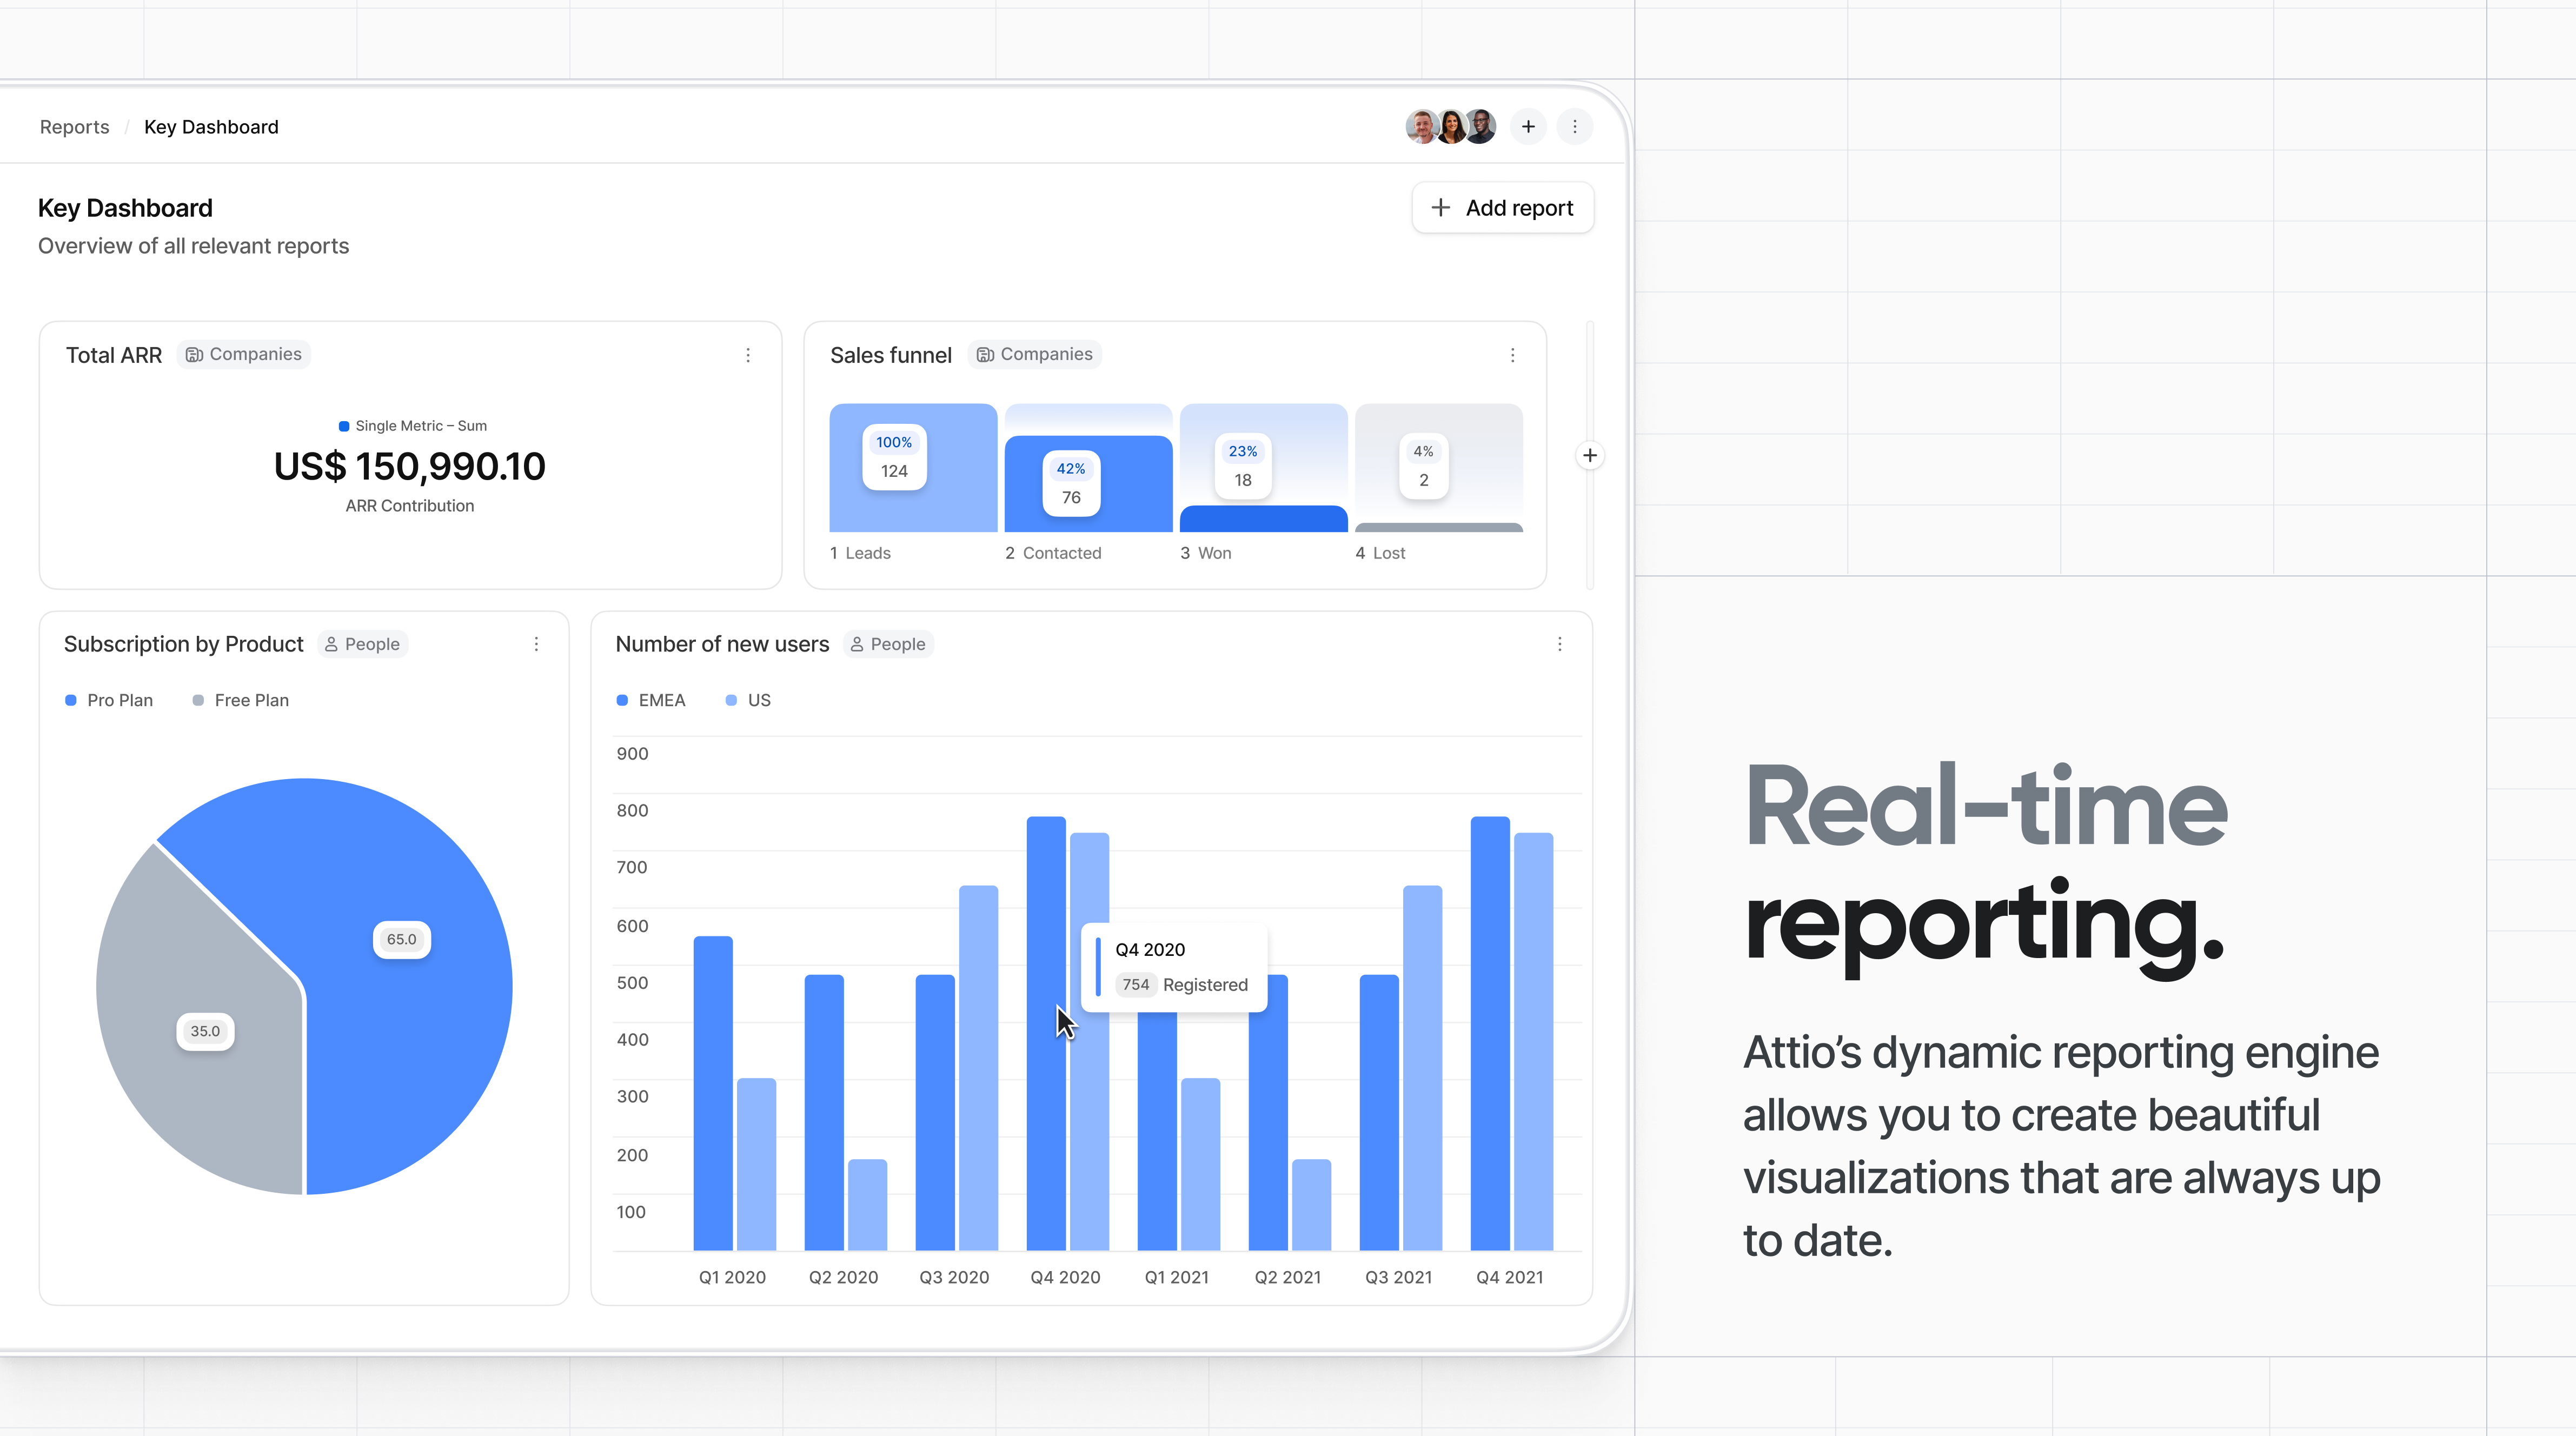 Real-time reporting: Attio’s dynamic reporting engine allows you to create beautiful visualizations that are always up to date.